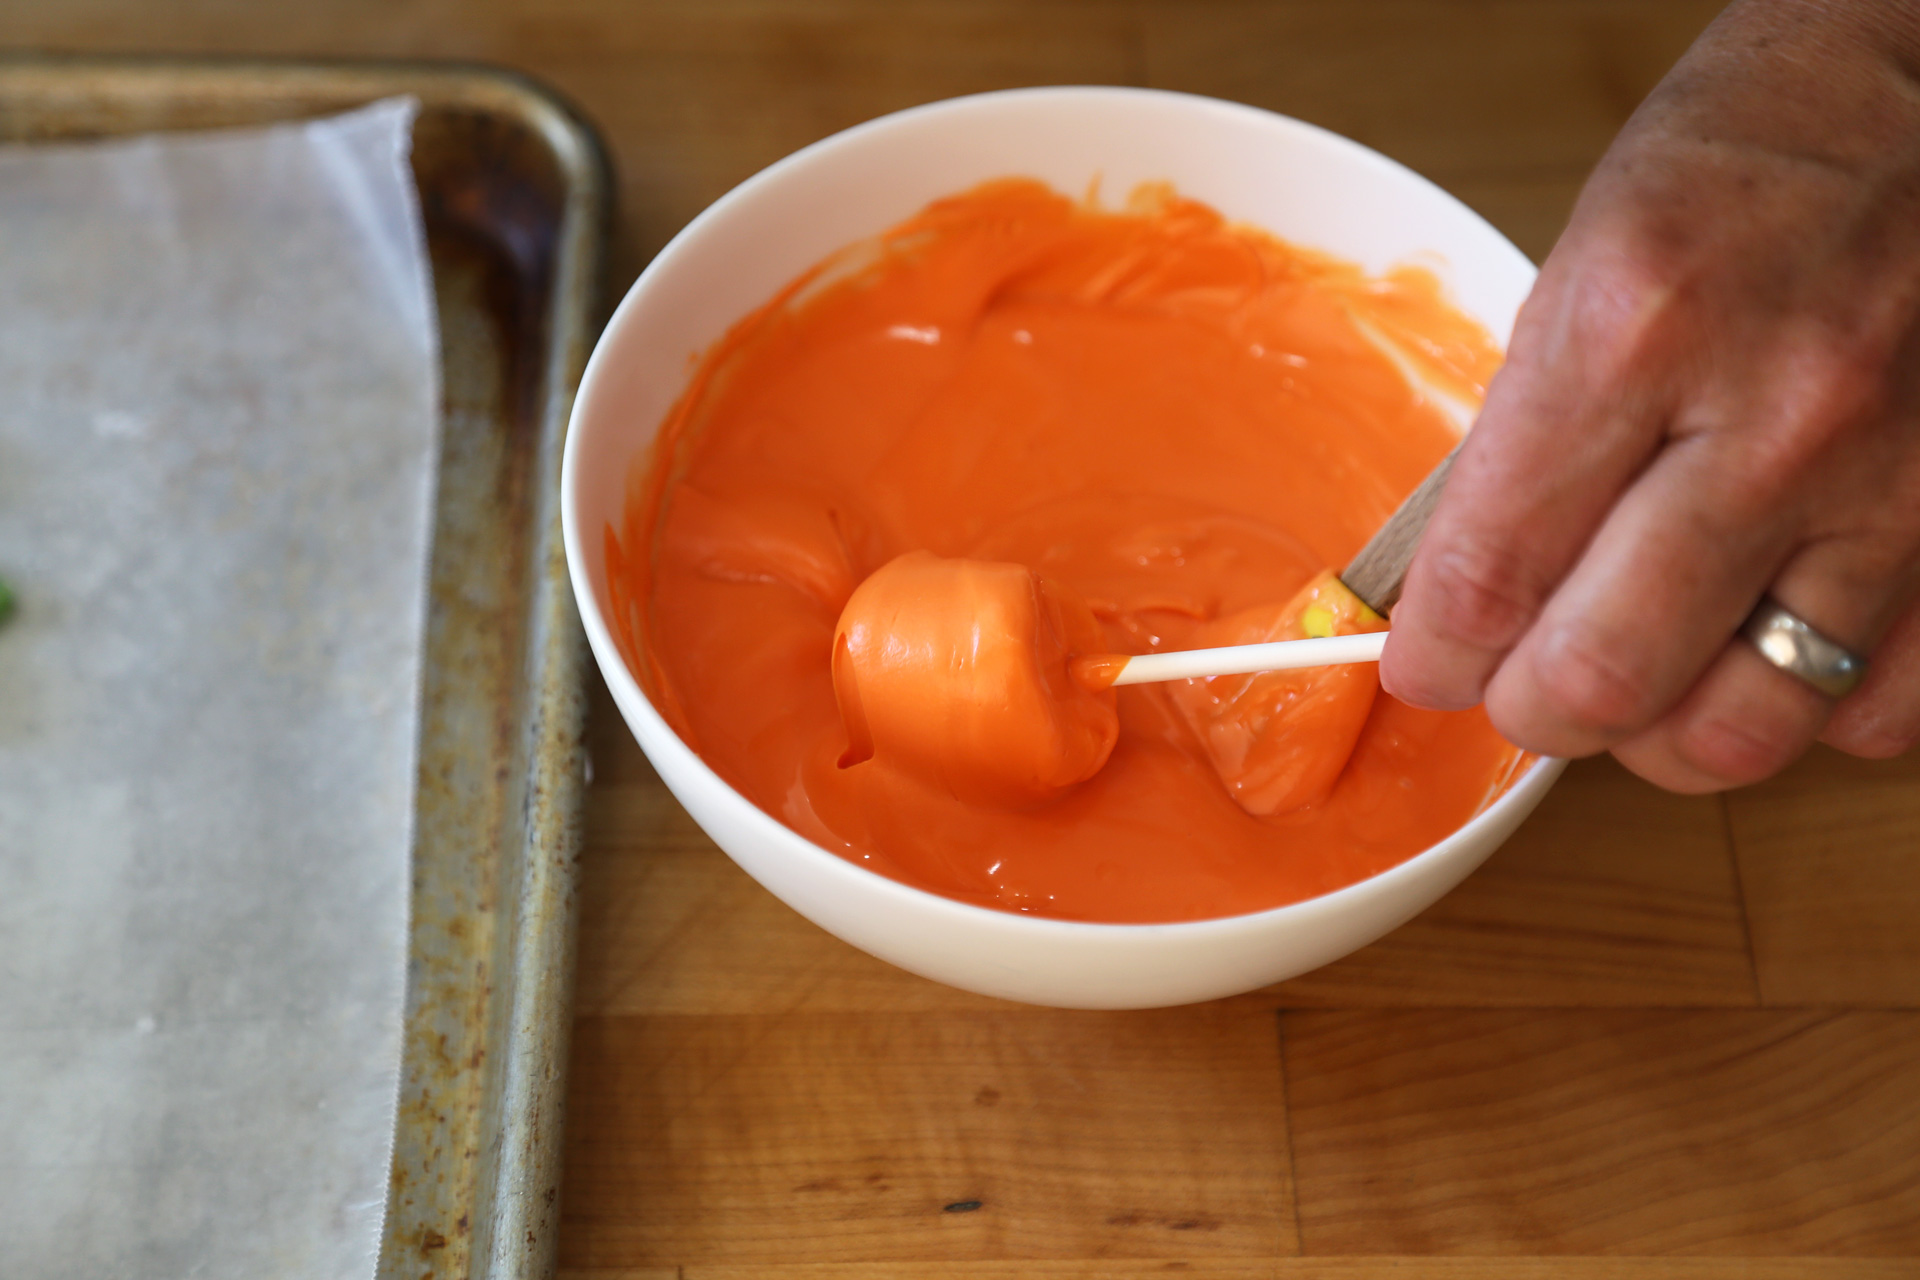 Use a small rubber spatula to help spread the coating over the marshmallow then roll the marshmallow on the edge of the bowl to remove some of the excess melted goo and to coat the marshmallow thinly and evenly.